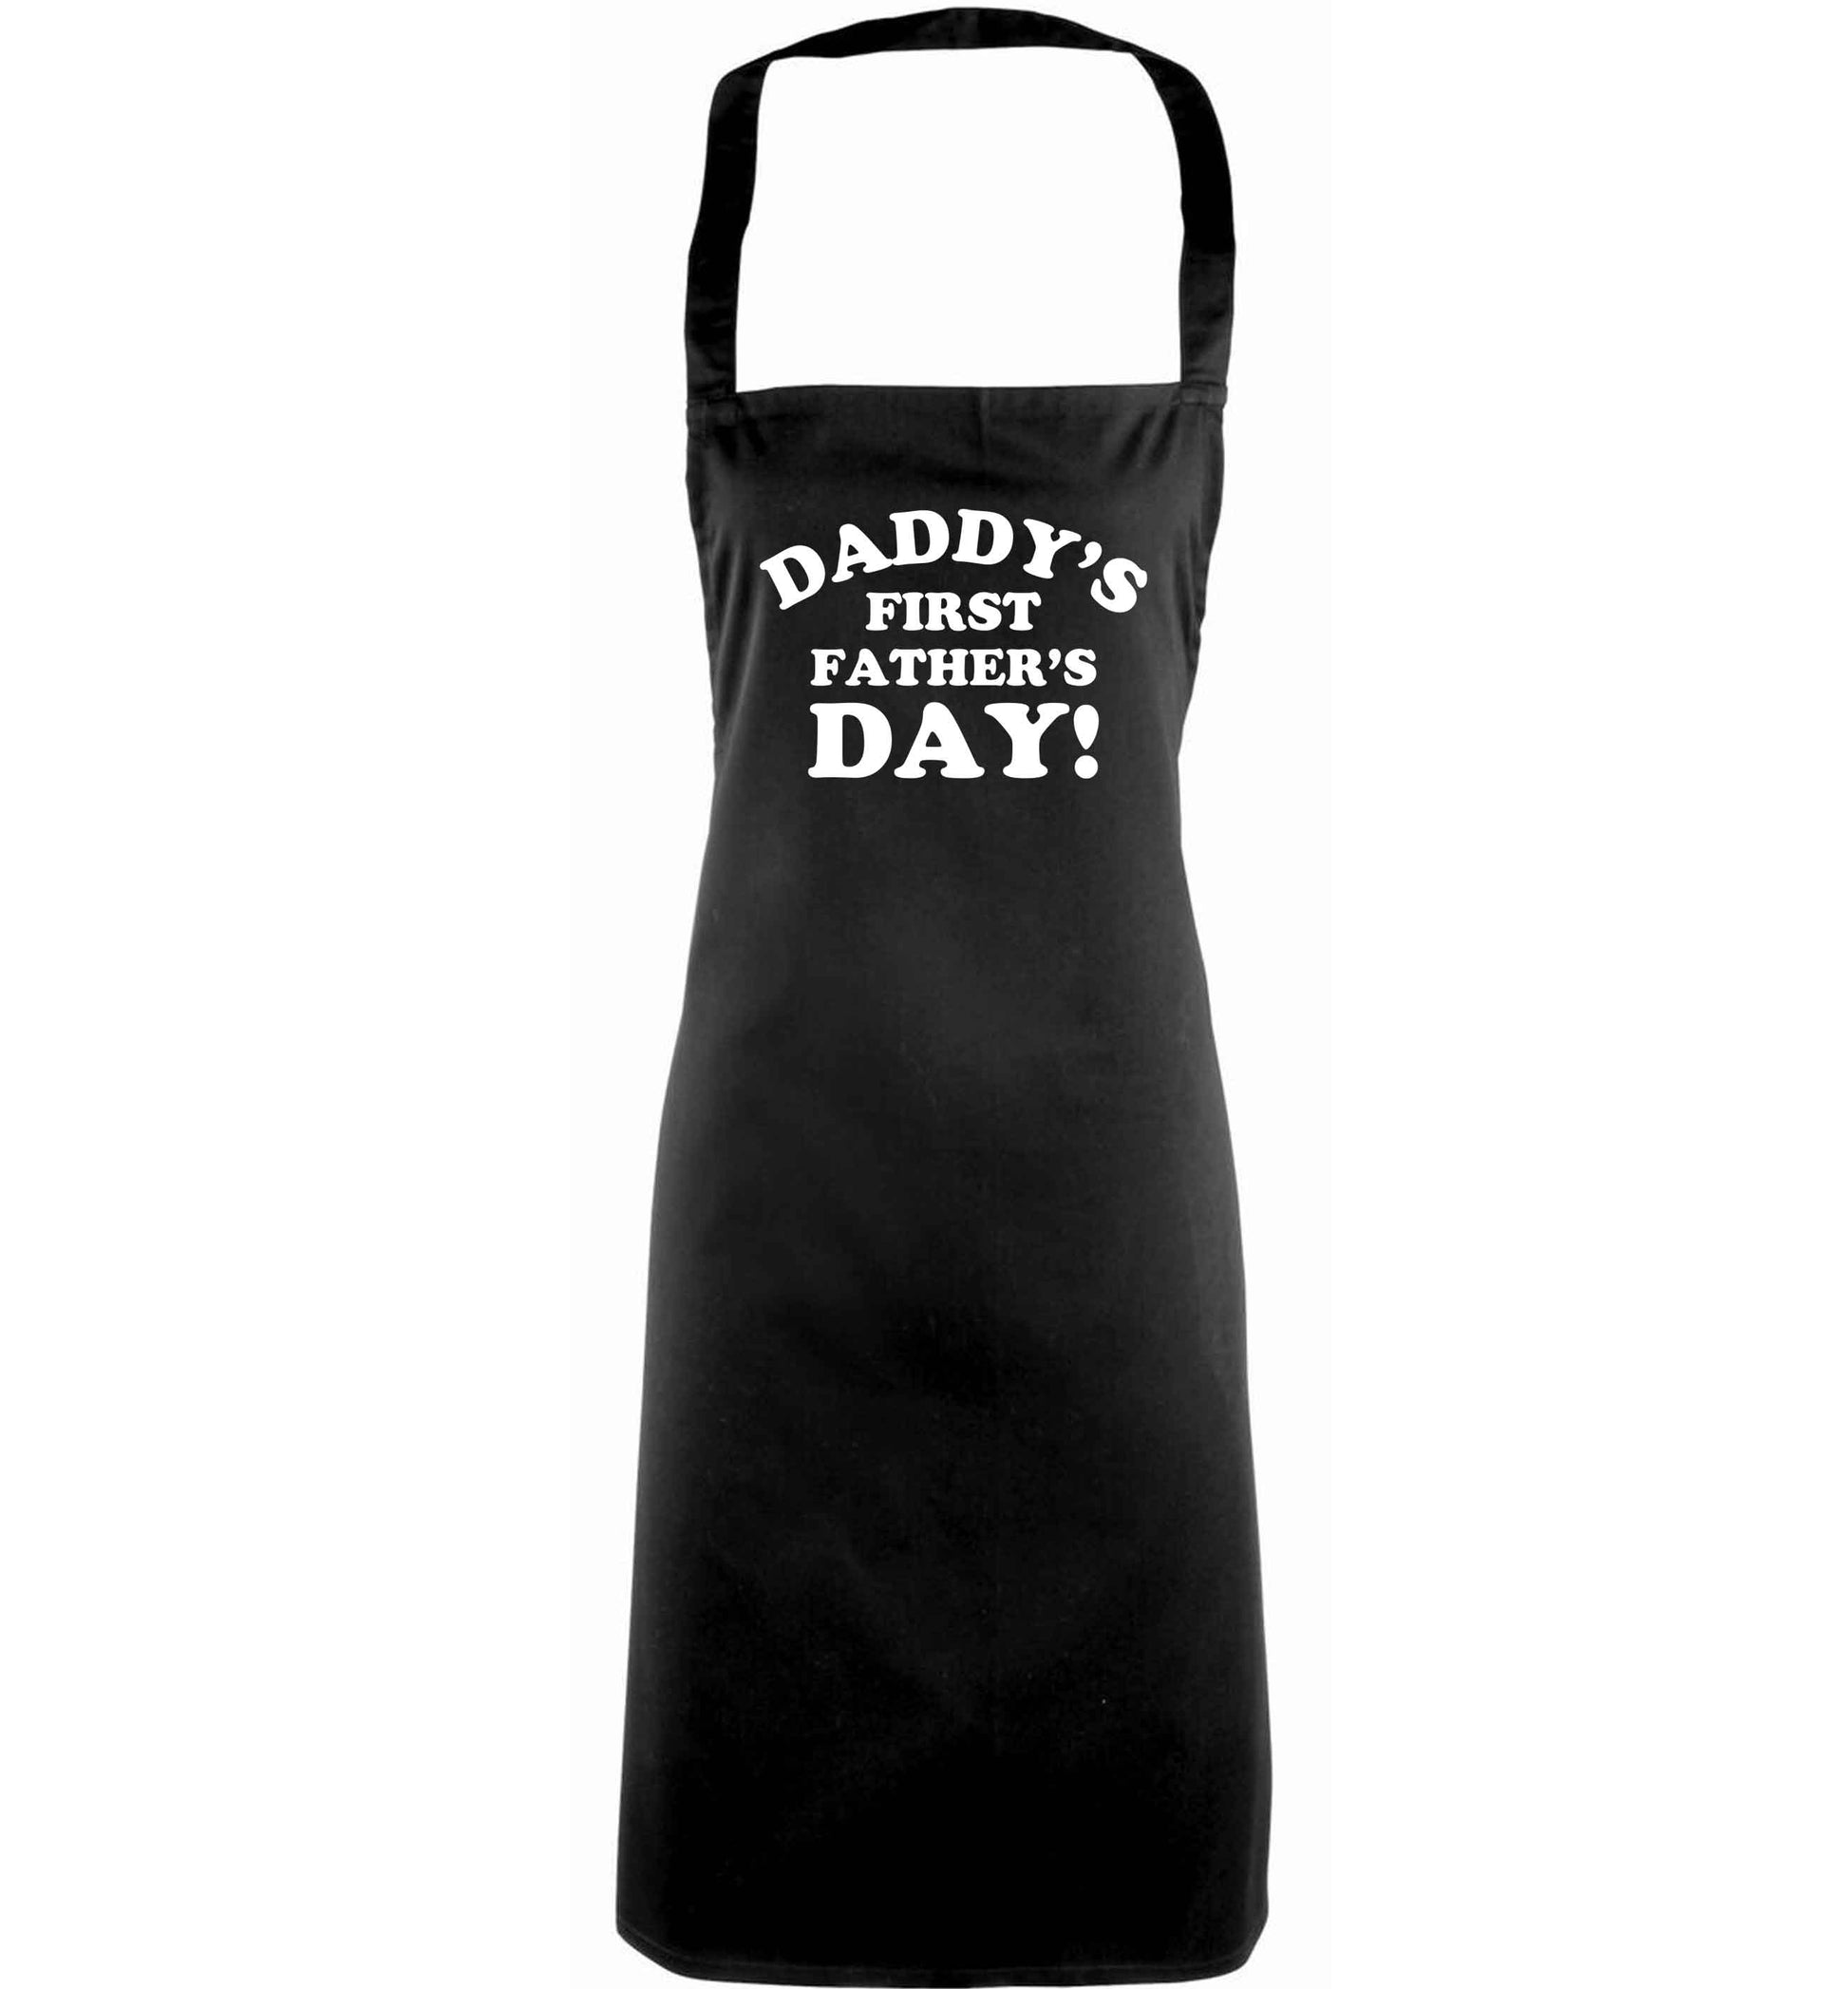 Daddy's first father's day adults black apron